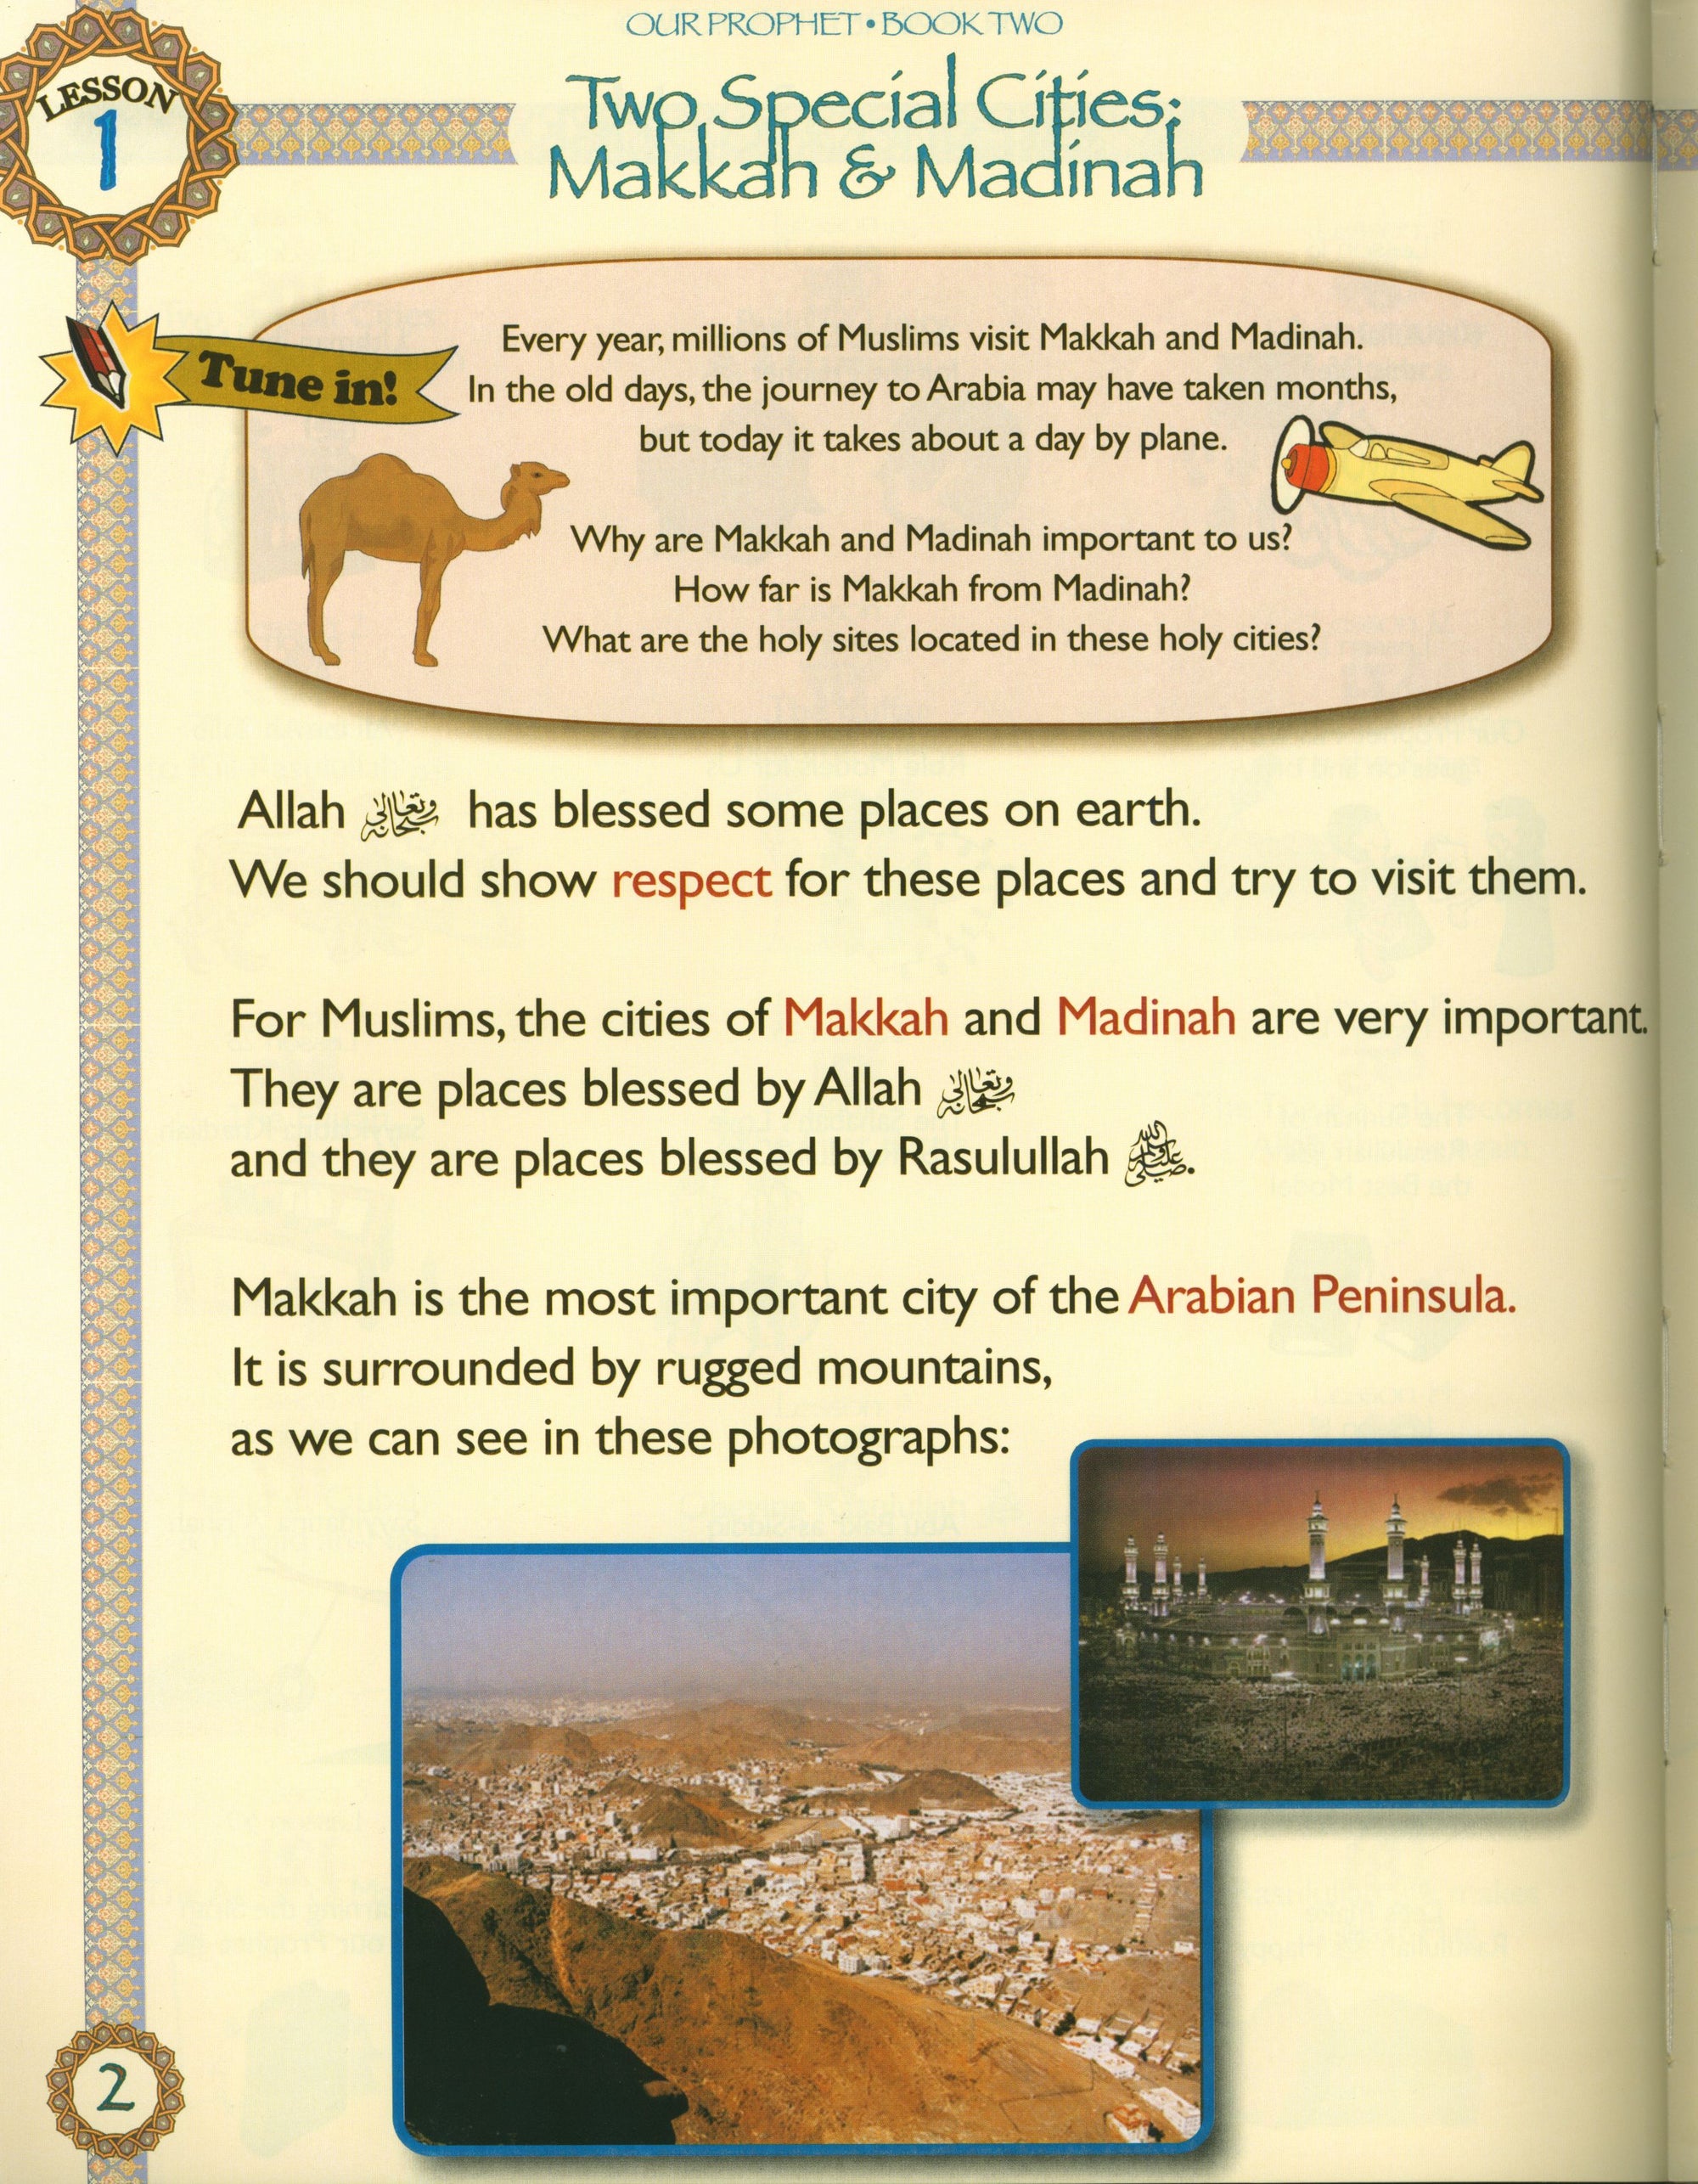 Our Prophet Muhammad (s) Life in Madinah Textbook - 3rd Grade